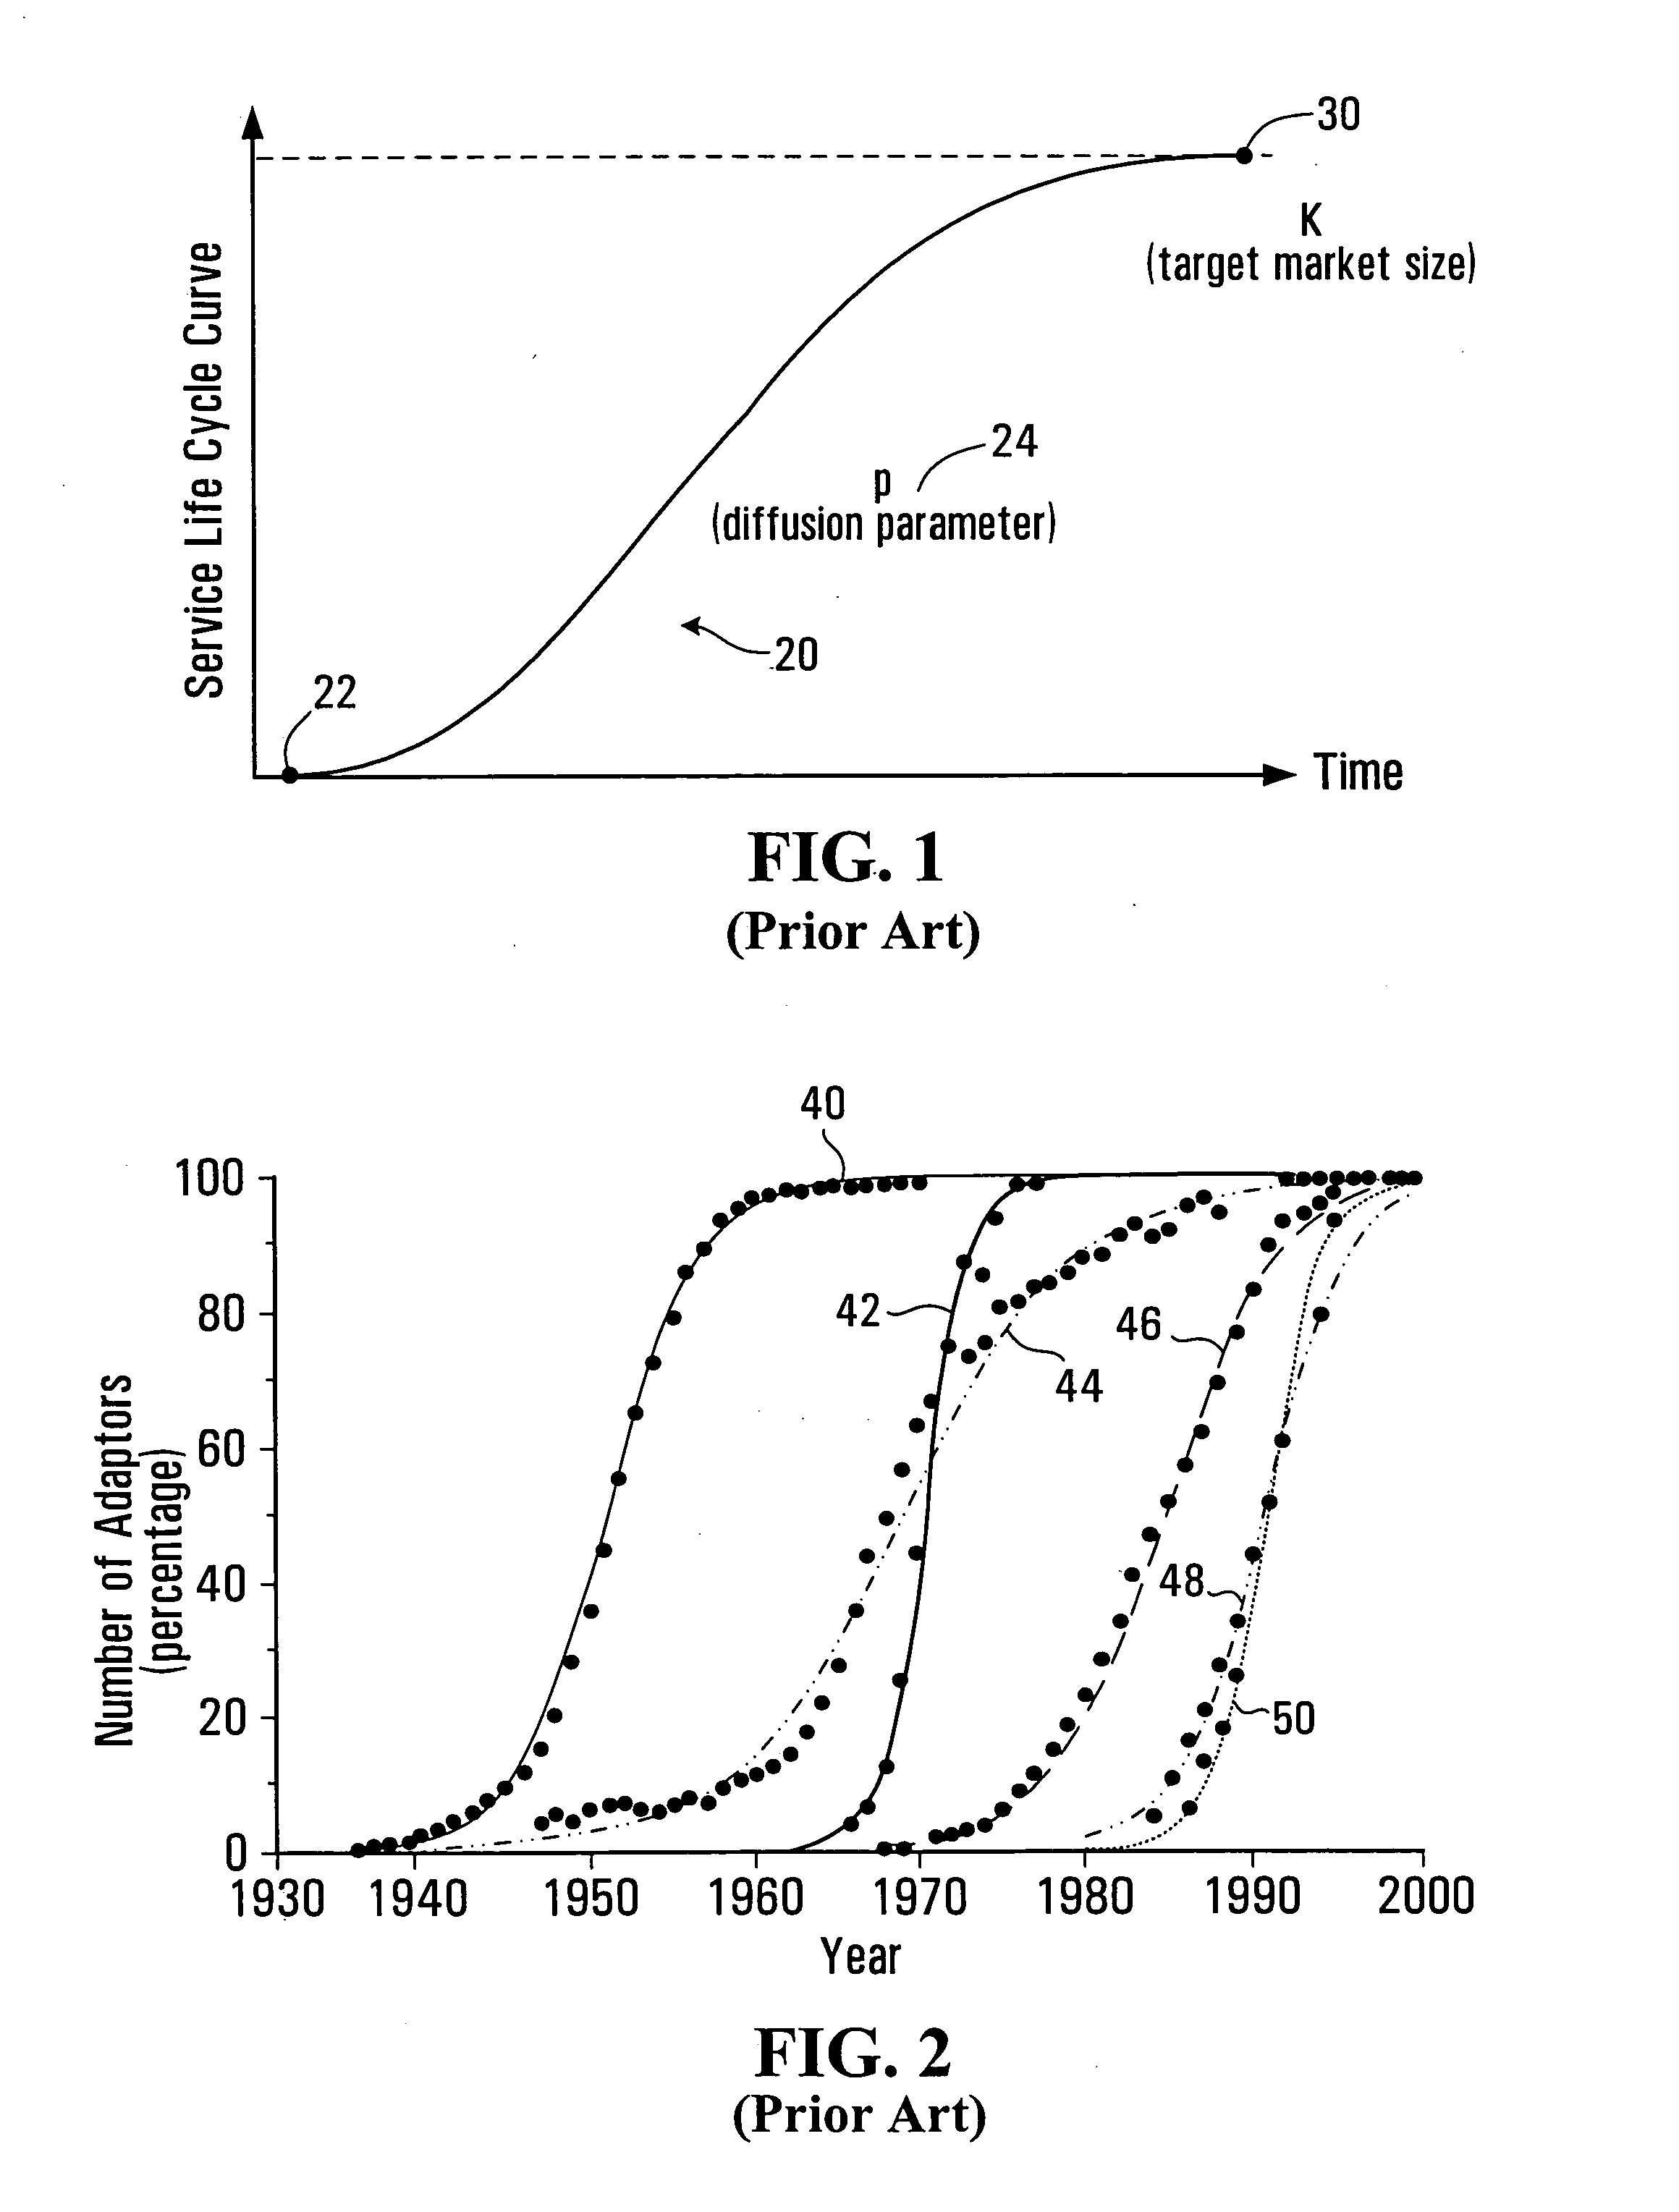 Method and system for predicting the adoption of services, such as telecommunication services